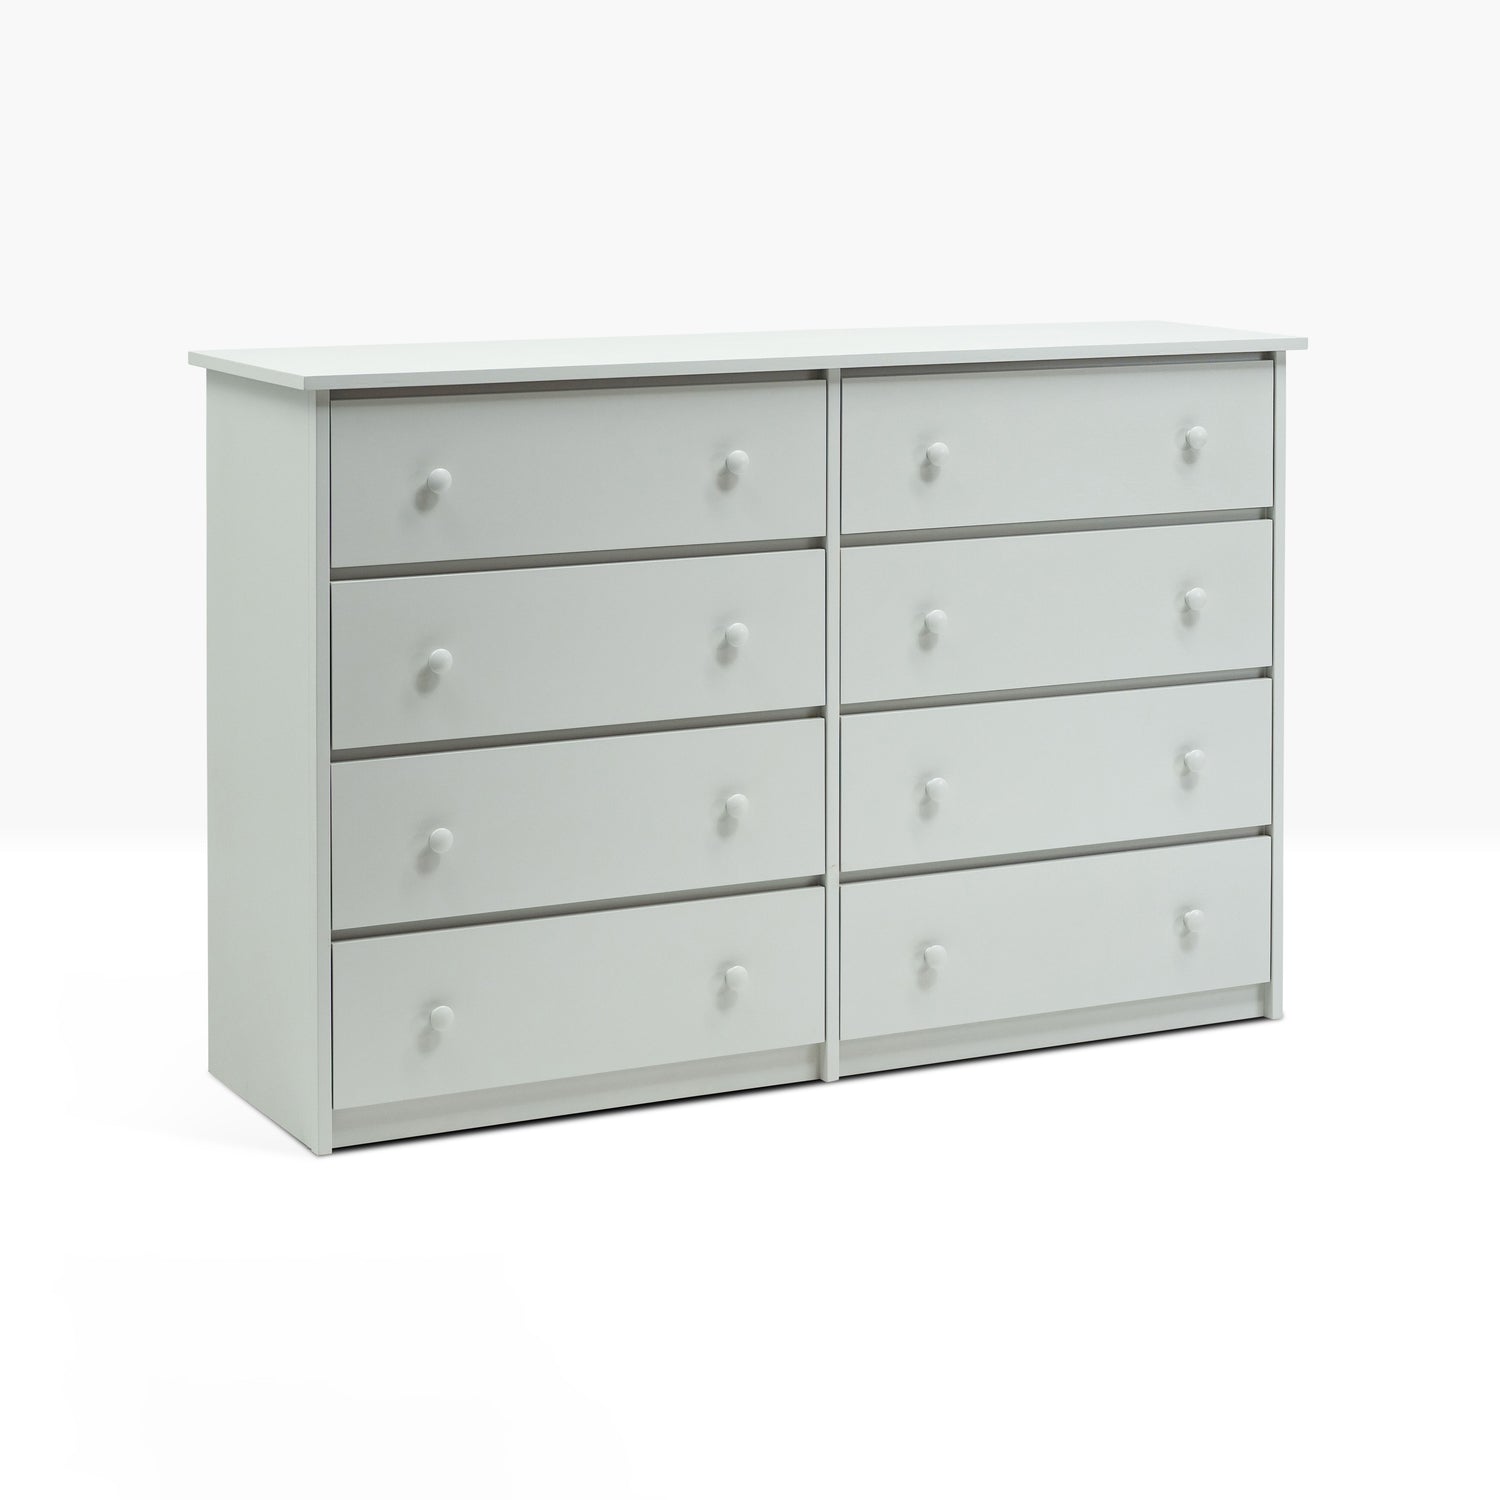 Berkshire Basic Dresser is built with birch and features eight standard drawers. Pictured in Stonington Gray